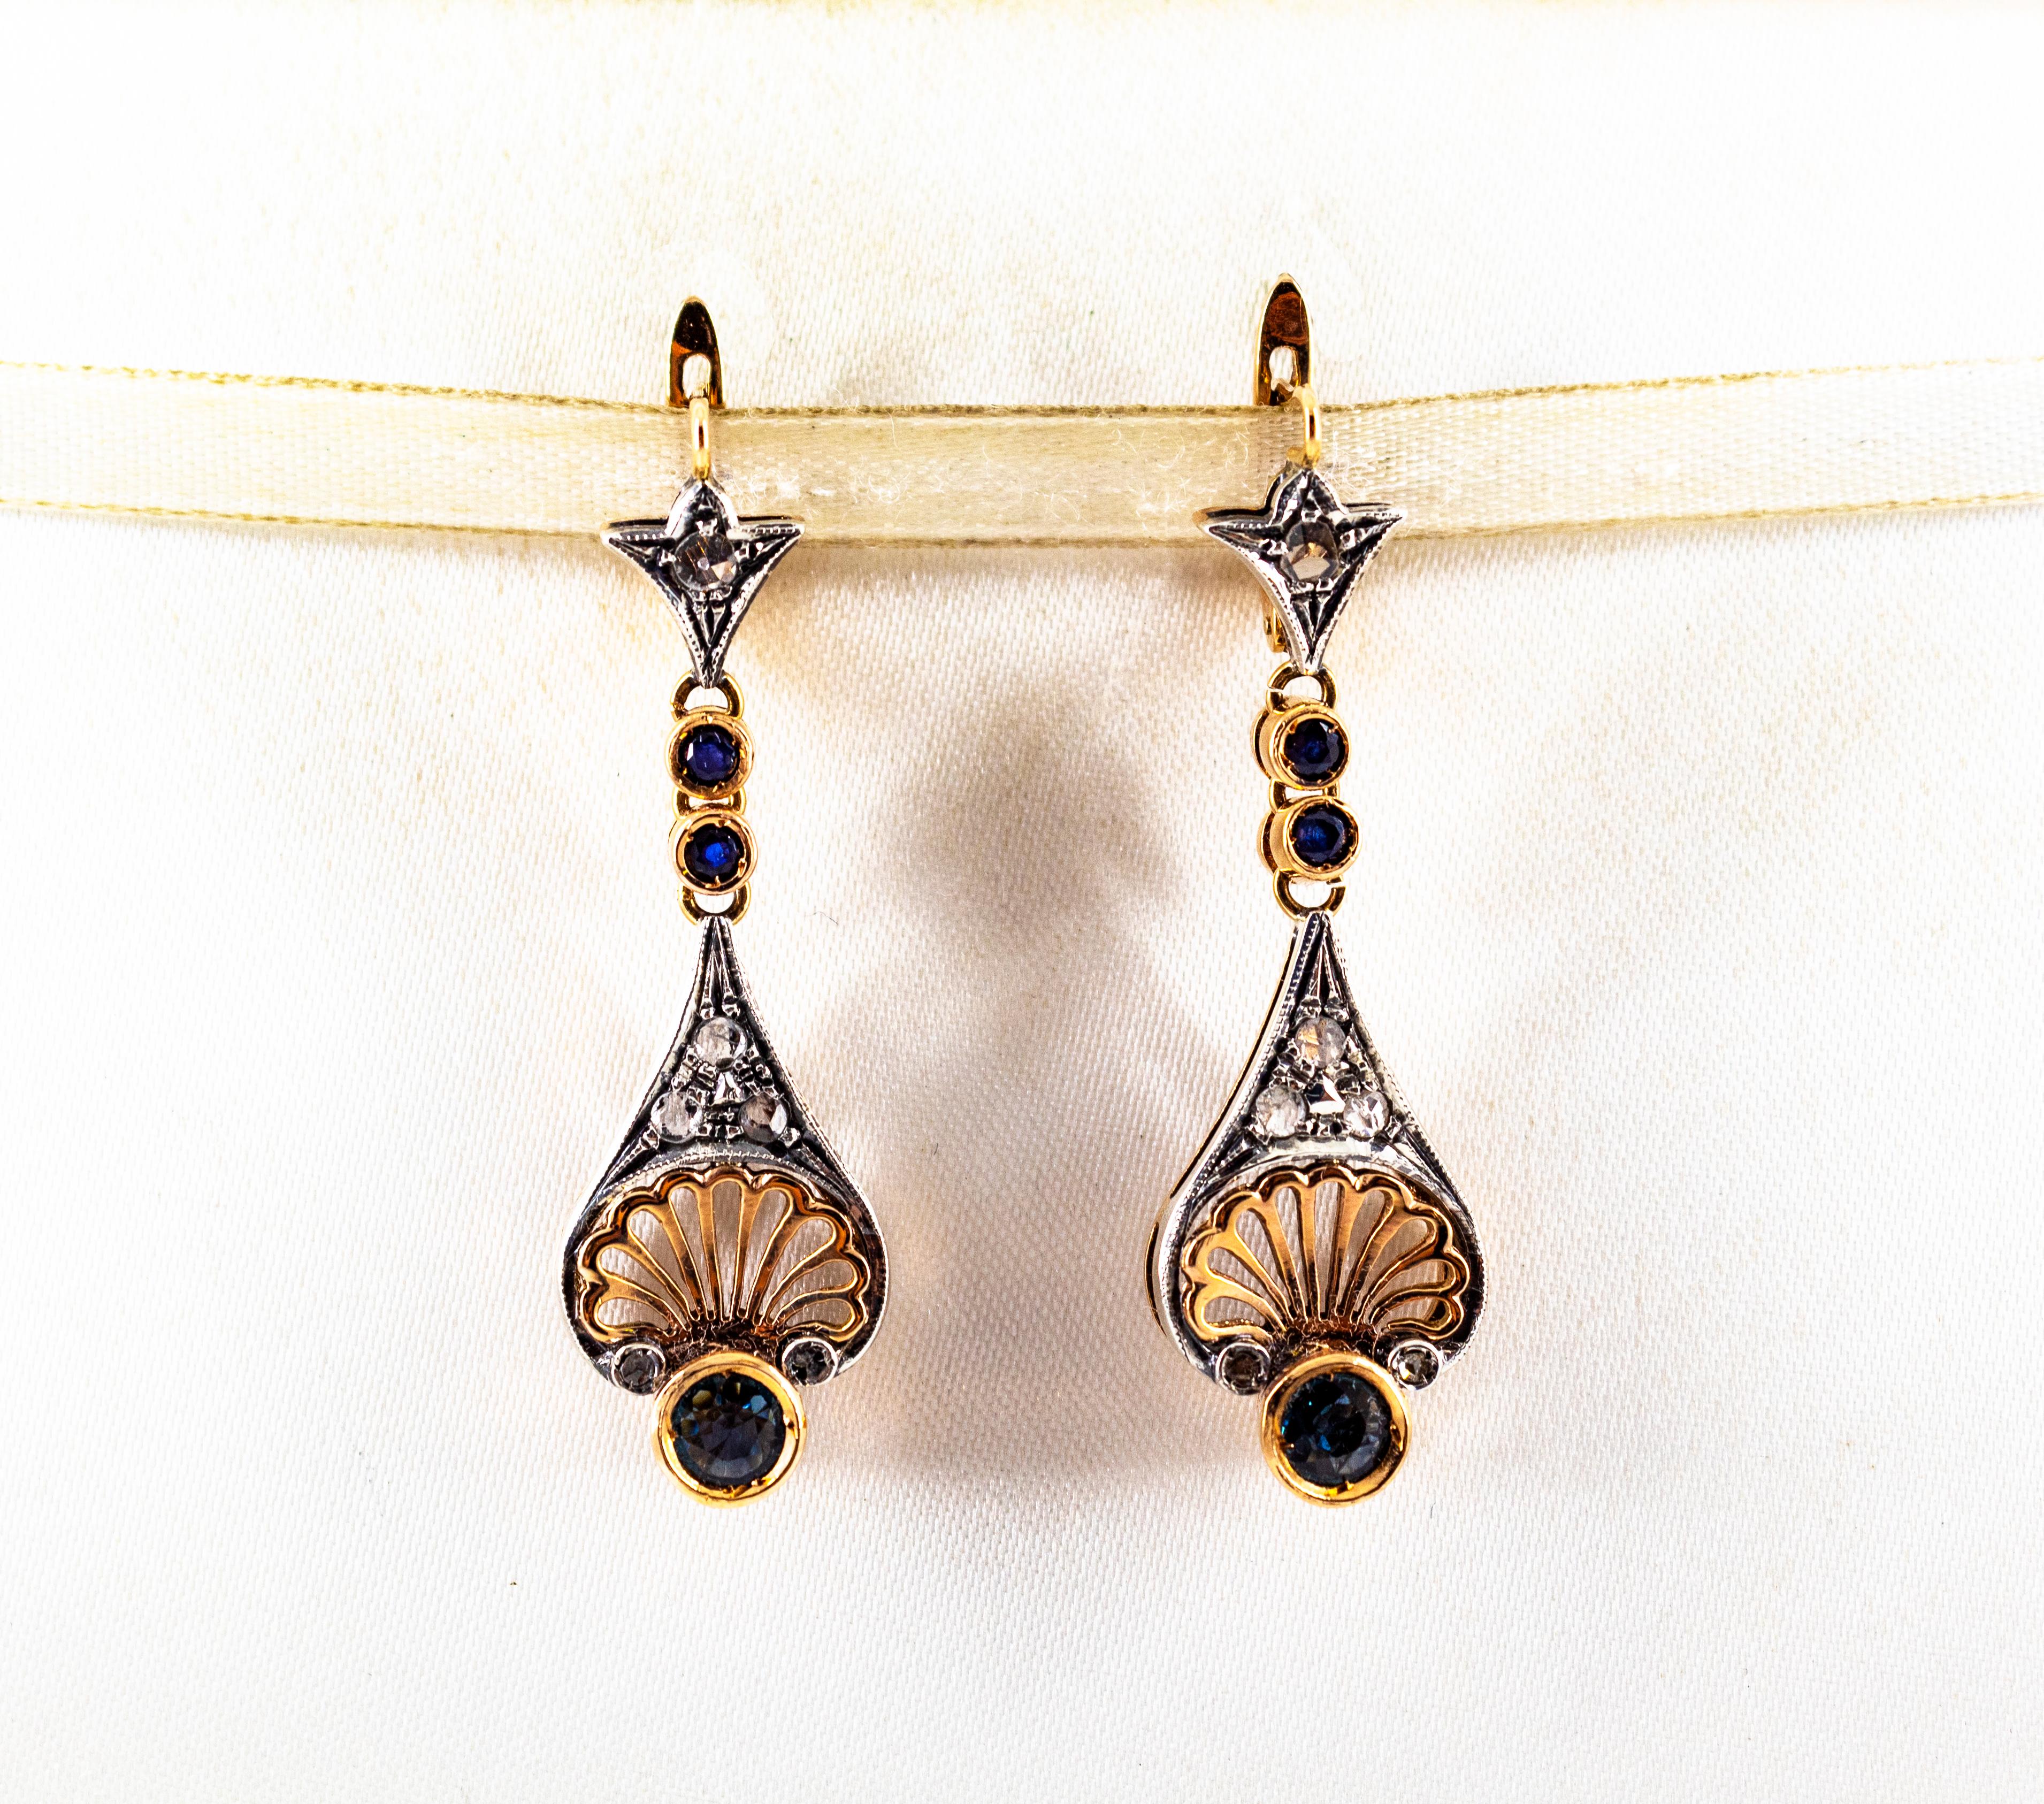 These Lever-Back Earrings are made of 9K Yellow Gold and Sterling Silver.
These Earrings have 0.30 Carats of White Rose Cut Diamonds.
These Earrings have also 1.00 Carat of Blue Sapphires.
These Earrings are available also with Rubies or